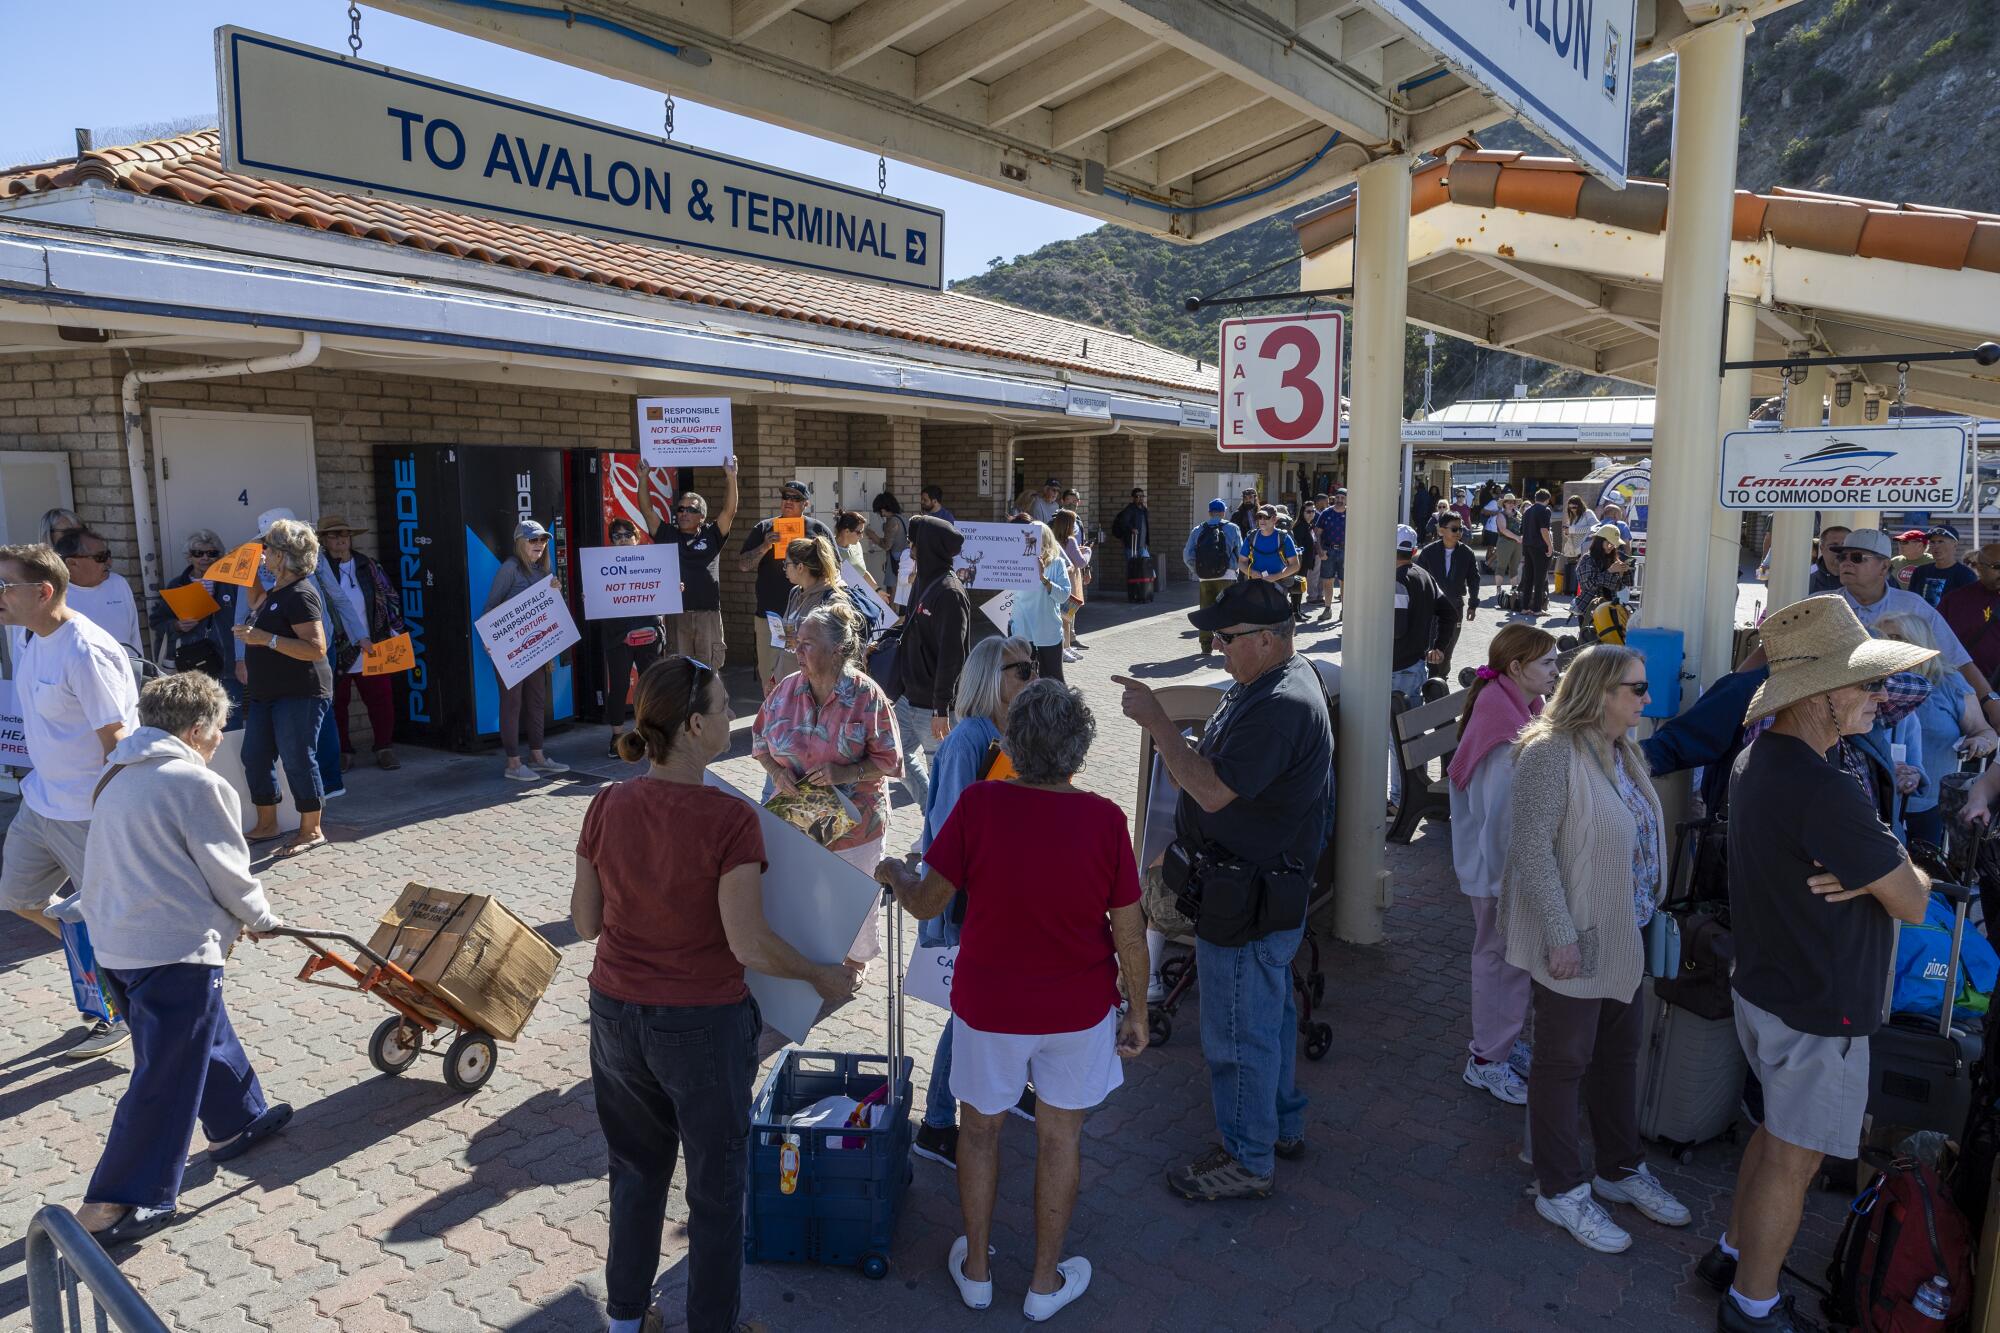 People stand around at the Catalina Express terminal on Catalina Island as other people hold protest signs